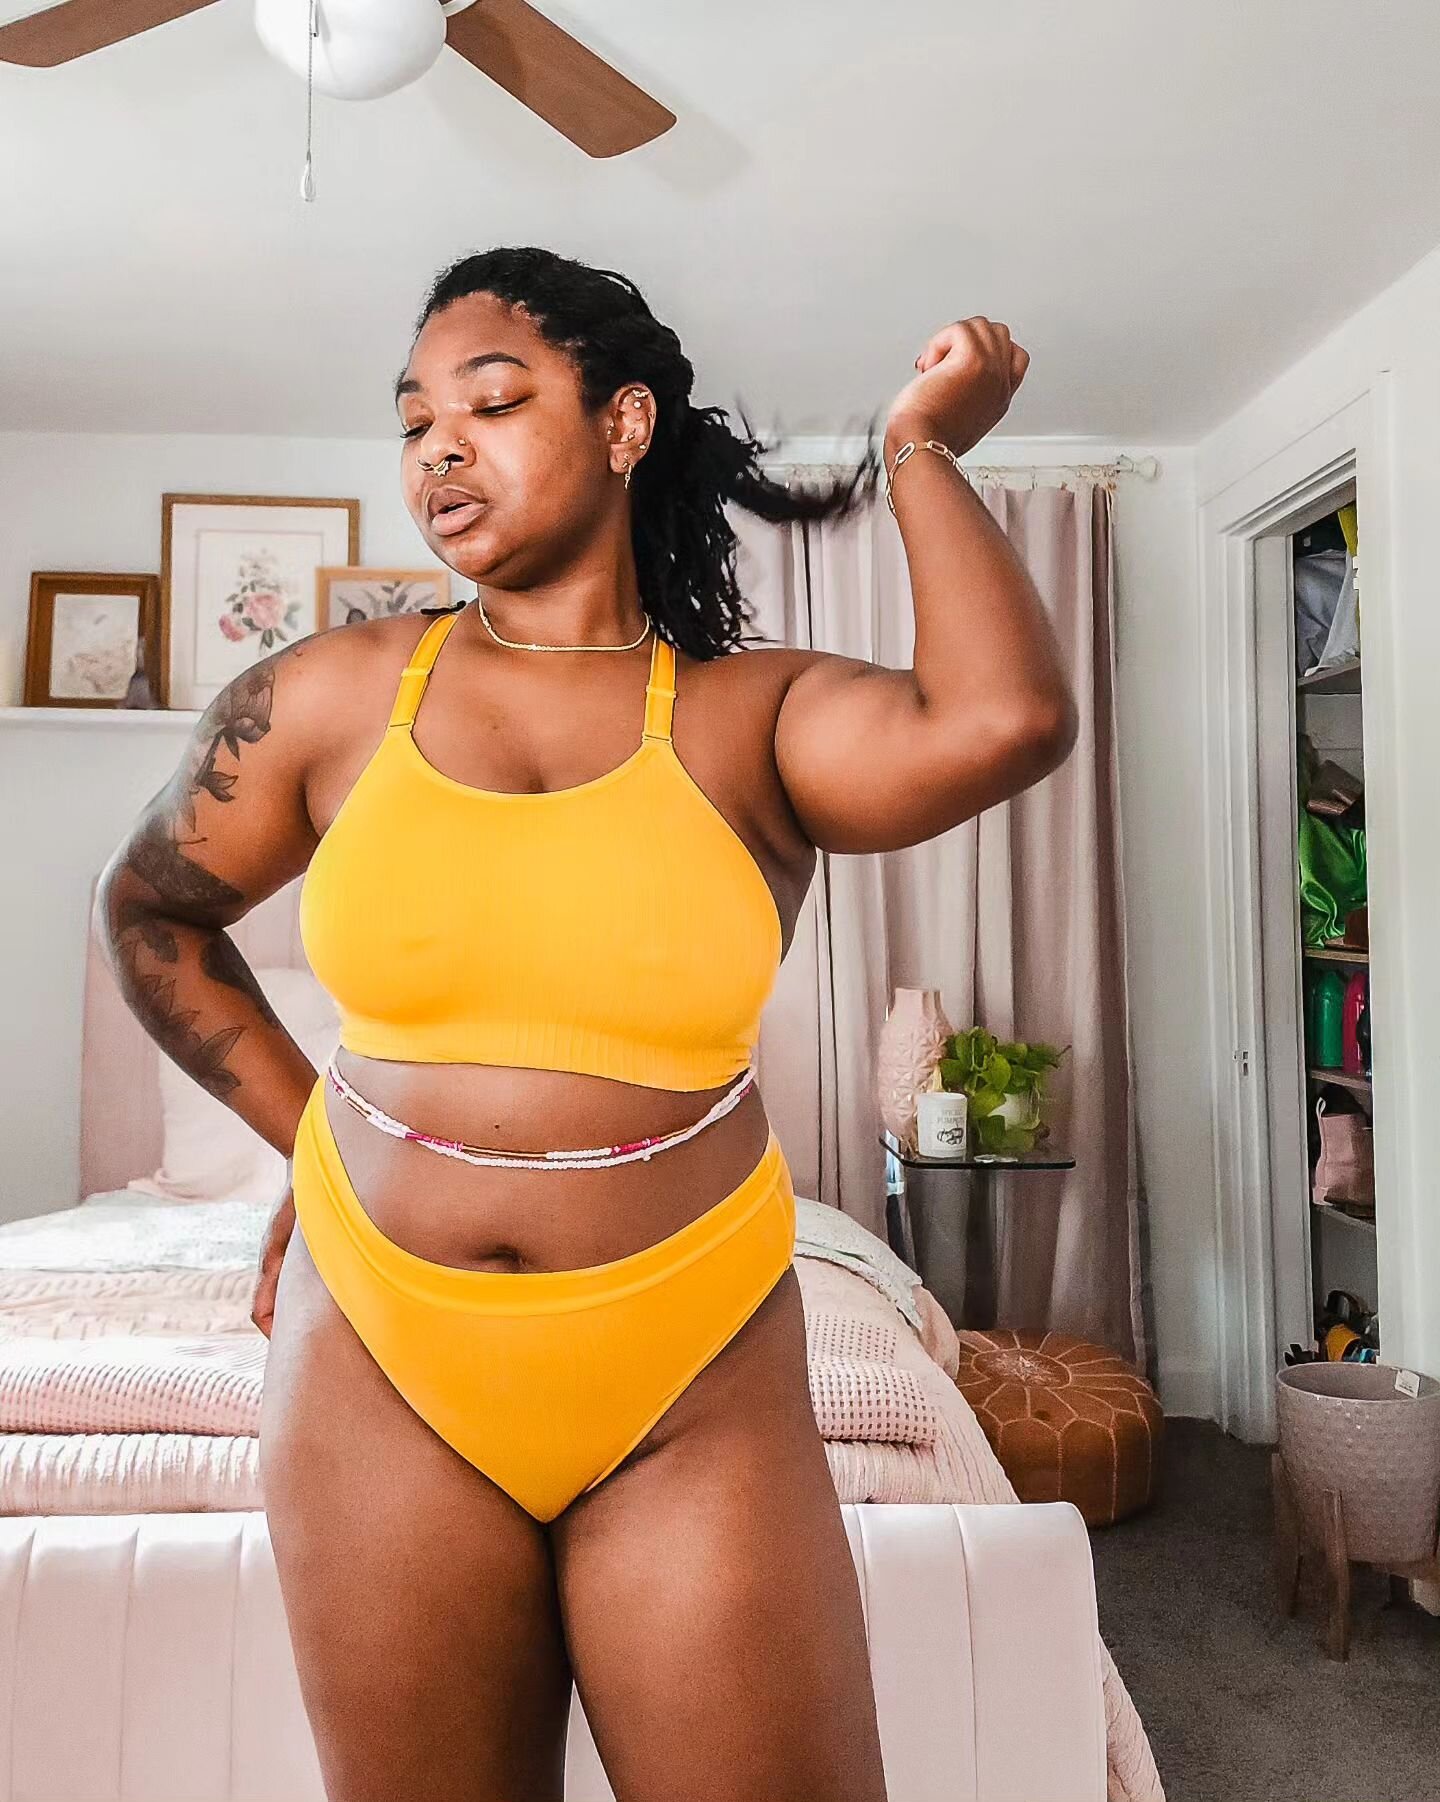 Me and yellow go together real bad 😮&zwj;💨🥵

Words by 
@theqii_tofitness
@alex_elle 
@thejordanmaney 

Set @curvycoutureintimates use code TIFFANYIMA for 30% off your first order

#selflove #selfcompassion #bodypeace #mybodymychoice #loveyourbody